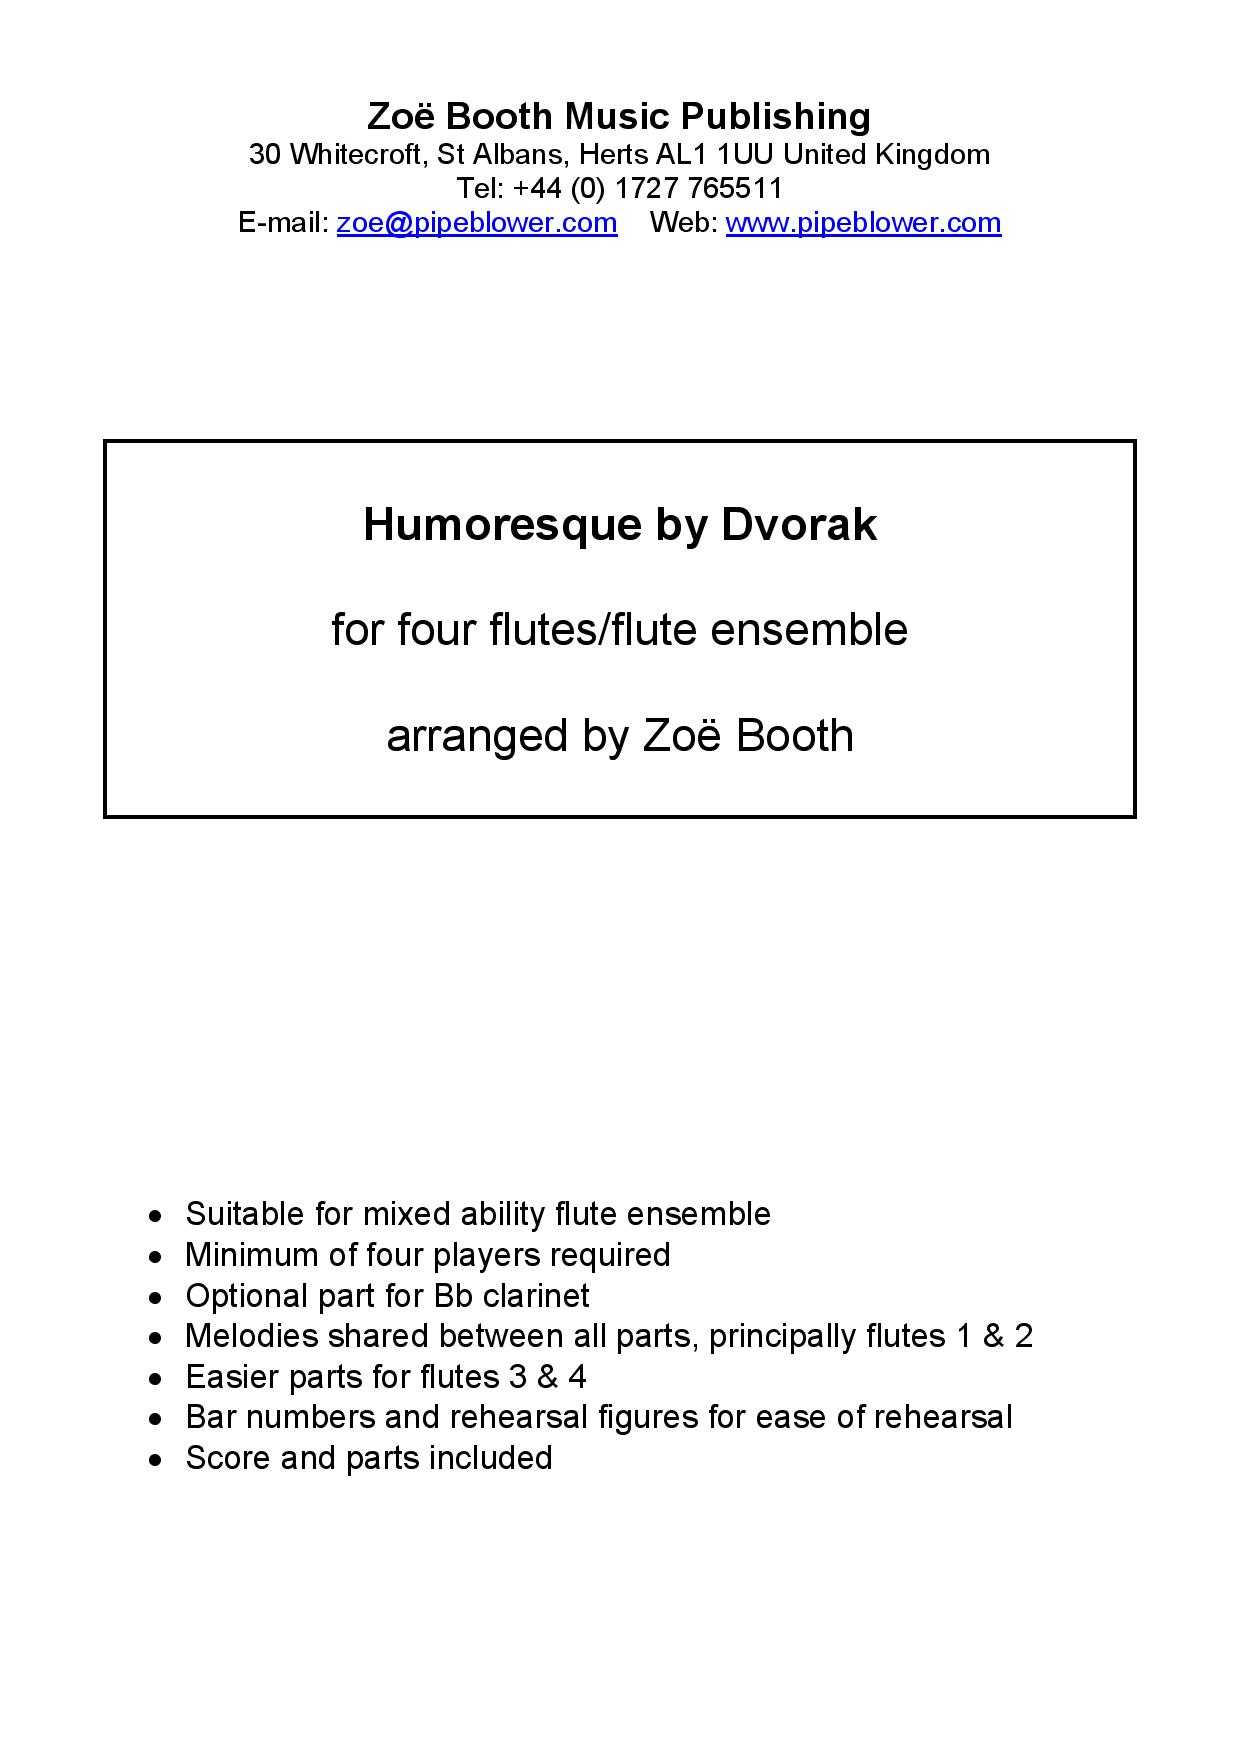 Humoresque by Dvorak,  arranged by Zoë Booth for four or more flutes/flute choir